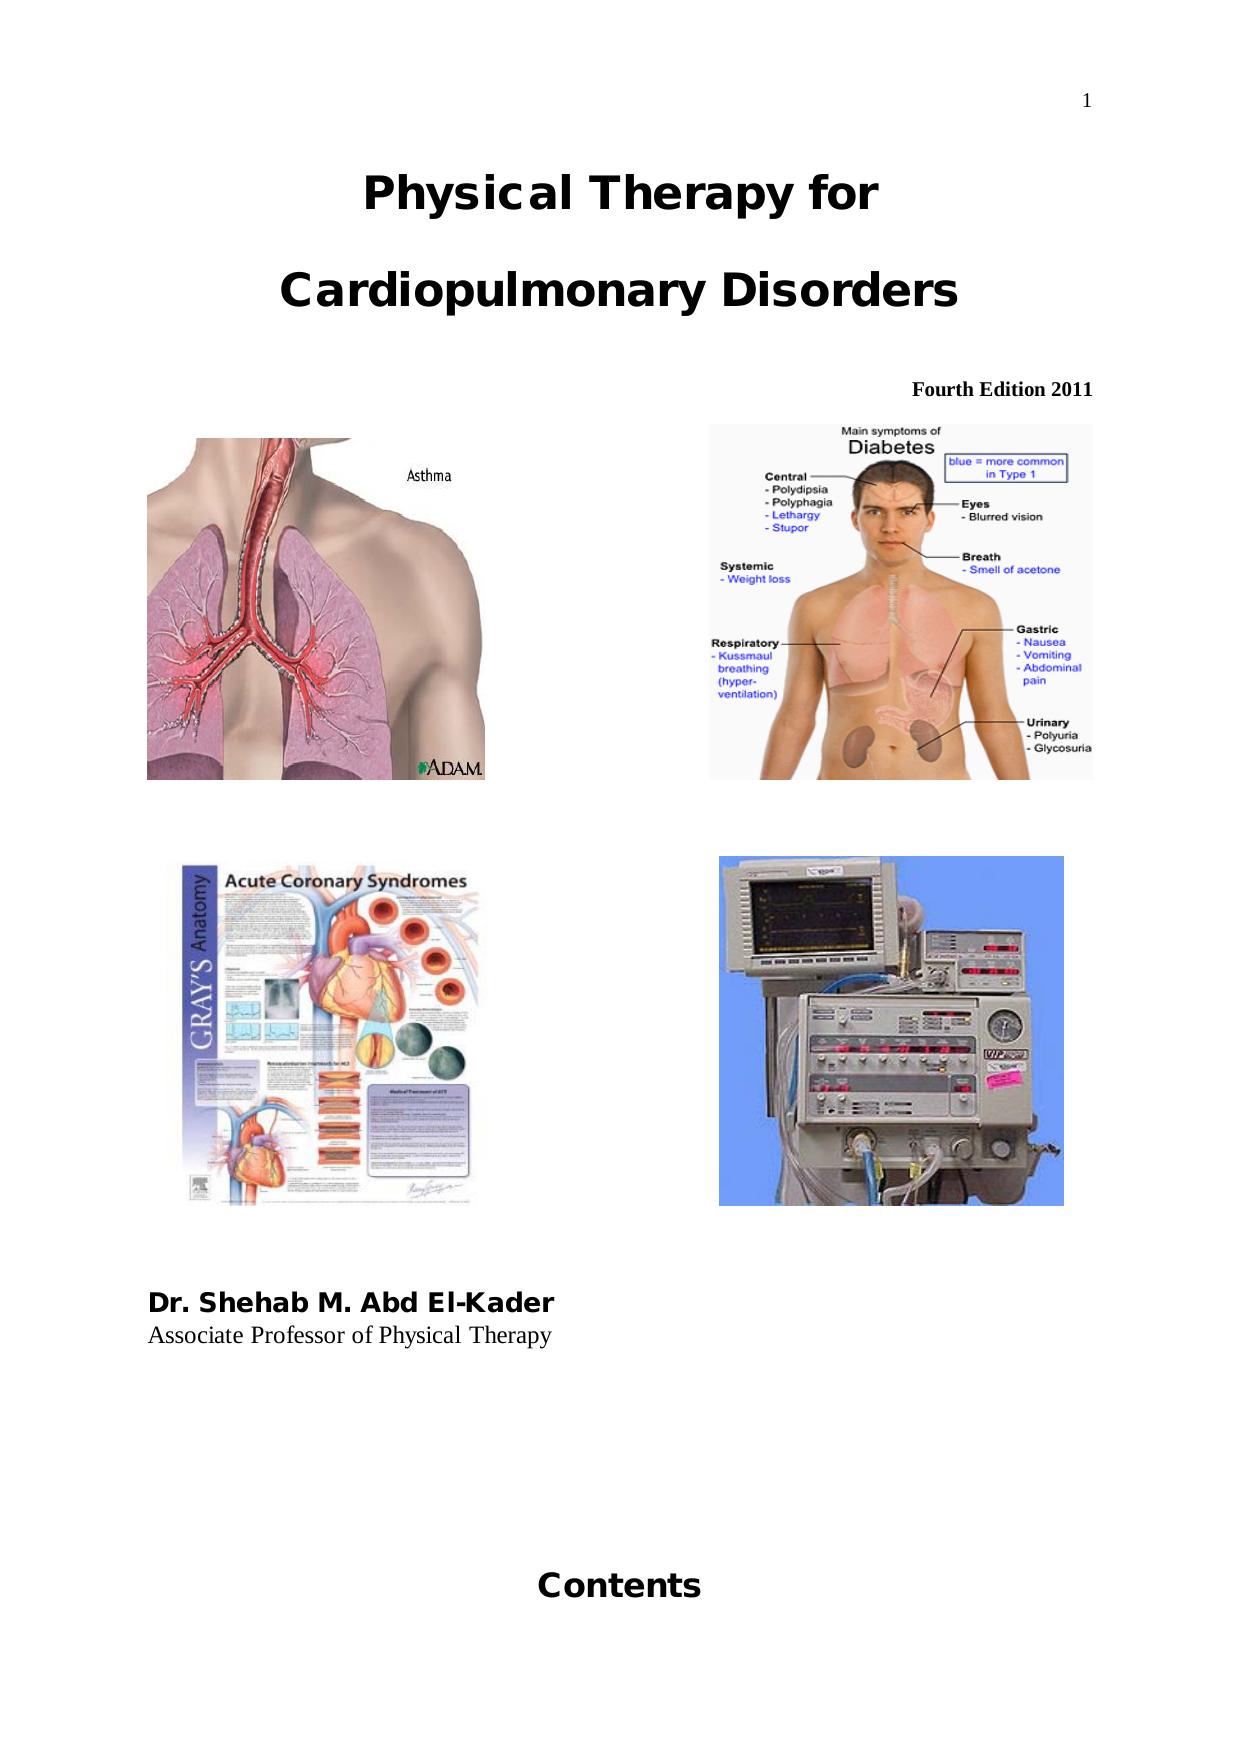 Physical Therapy for Cardiopumonary Disorders